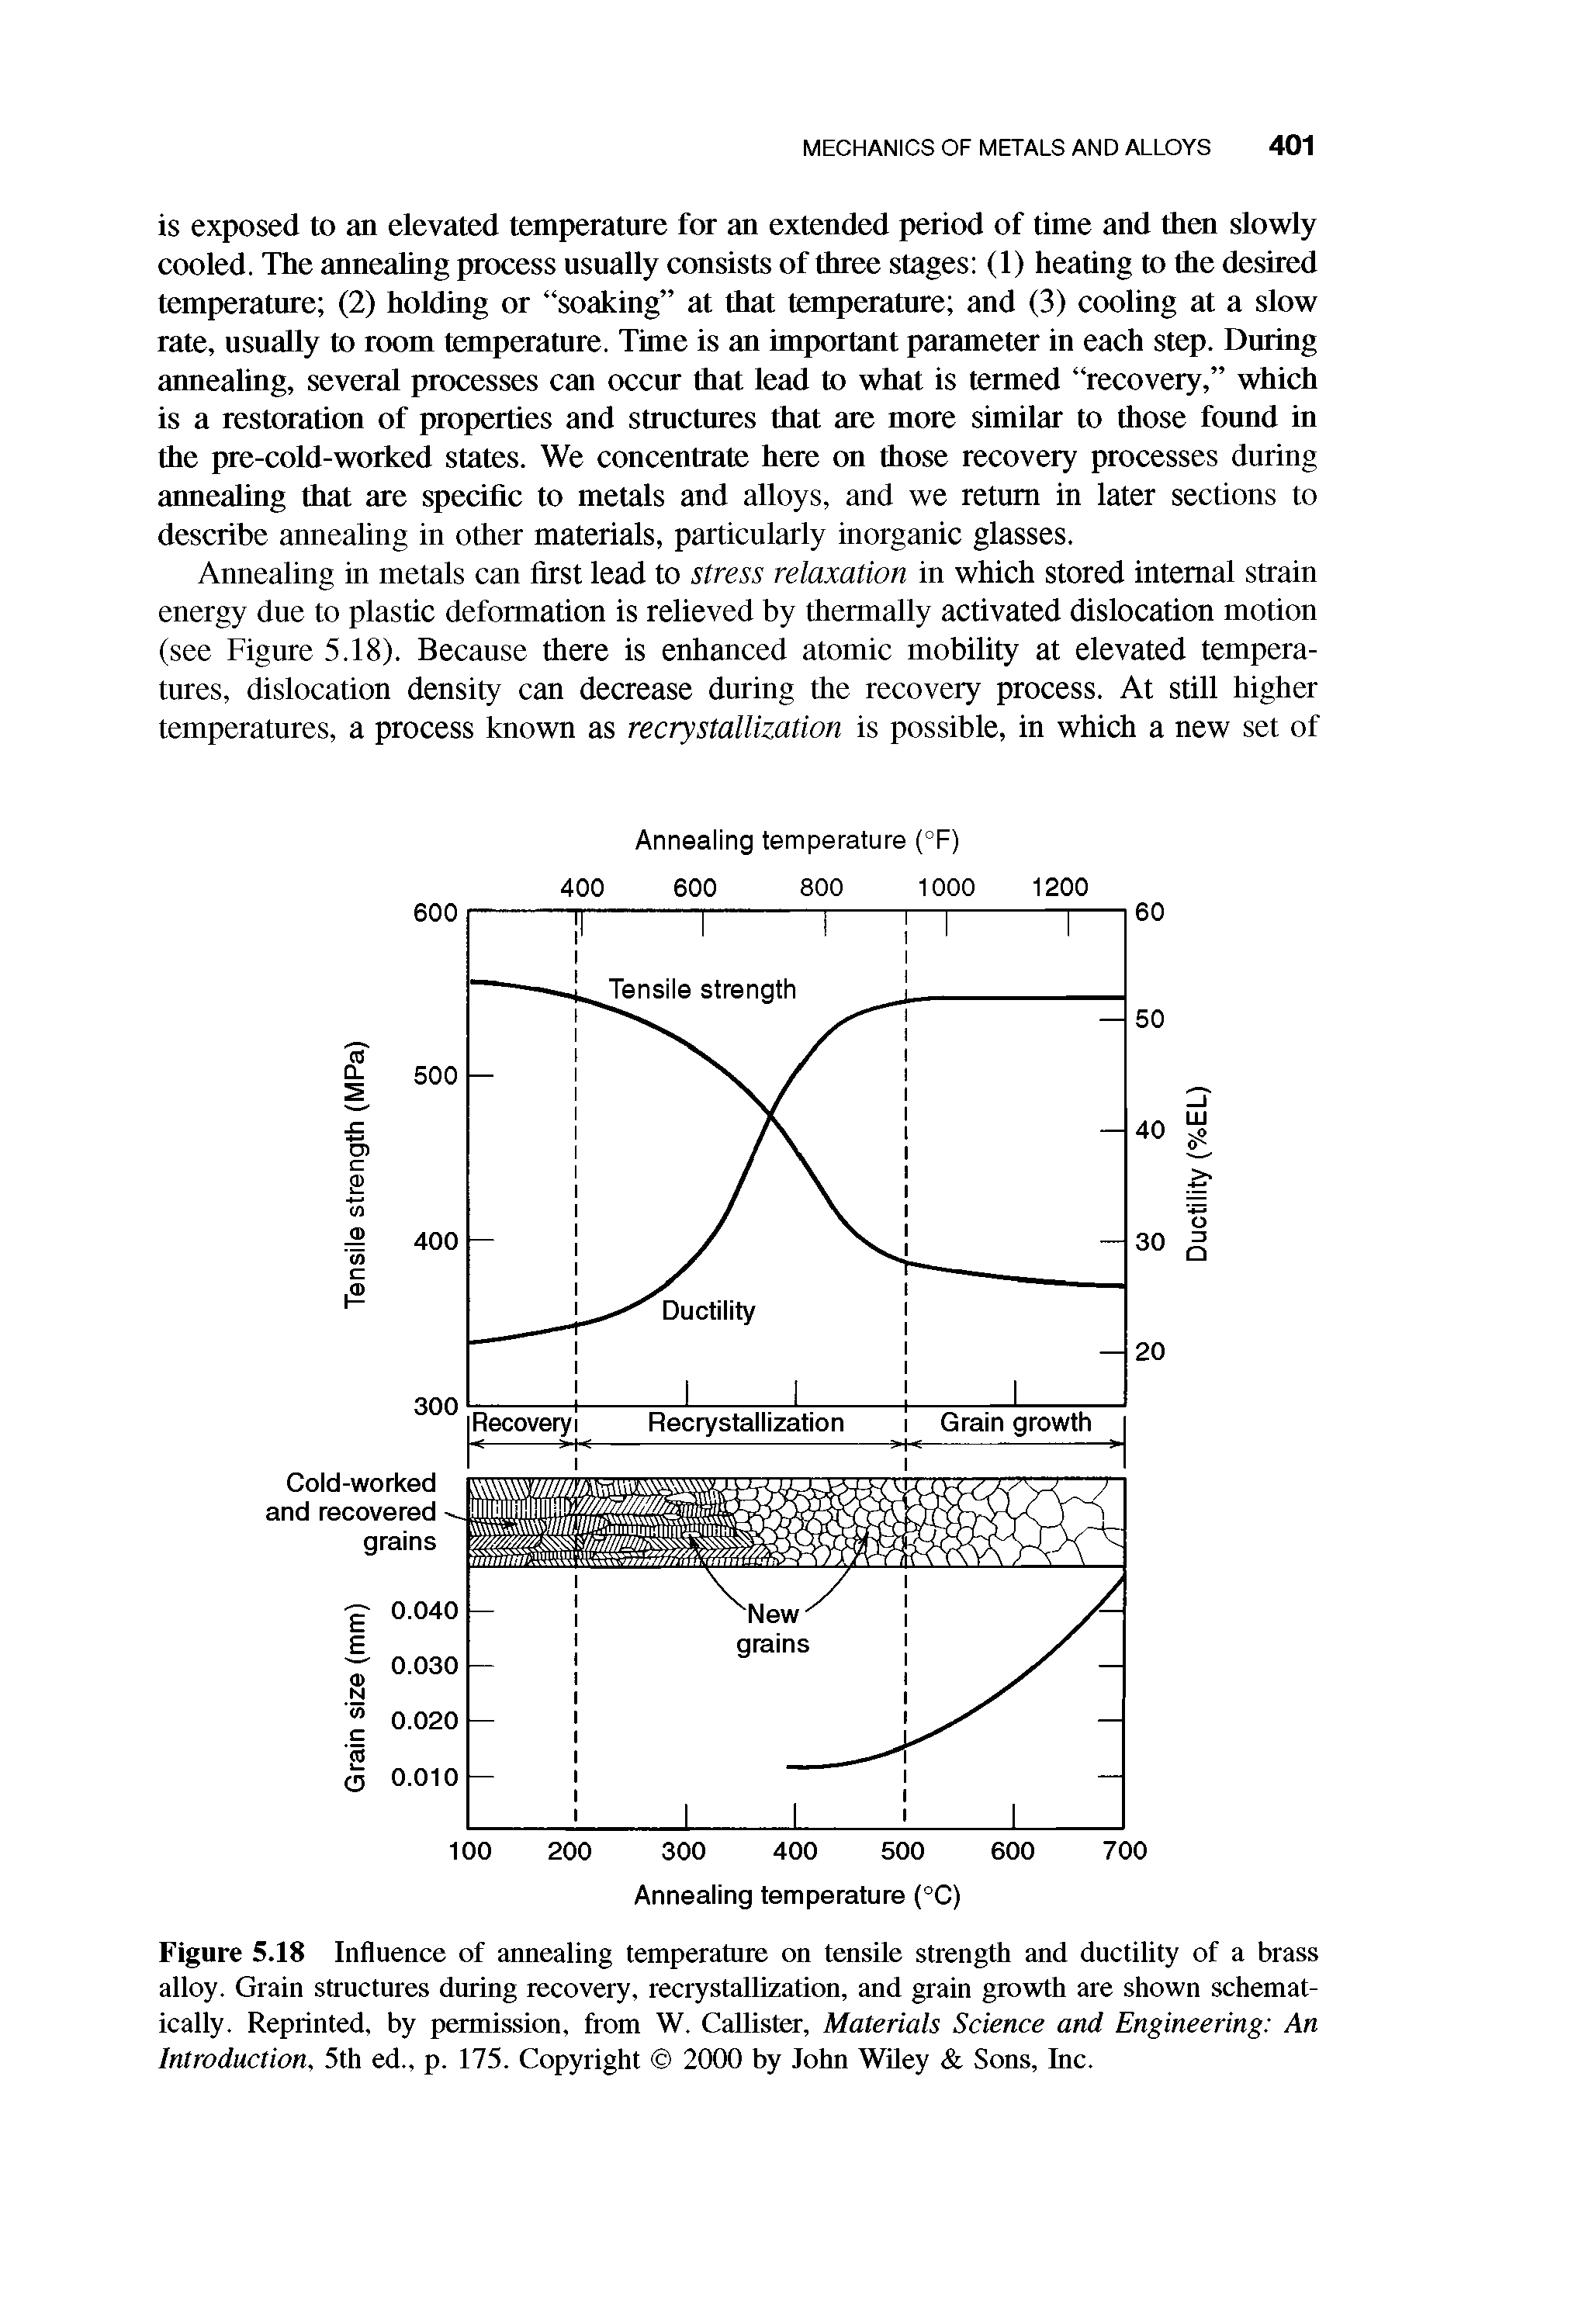 Figure 5.18 Influence of annealing temperature on tensile strength and ductility of a brass alloy. Grain structures during recovery, recrystallization, and grain growth are shown schematically. Reprinted, by permission, from W. Callister, Materials Science and Engineering An Introduction, 5th ed., p. 175. Copyright 2000 by John WUey Sons, Inc.